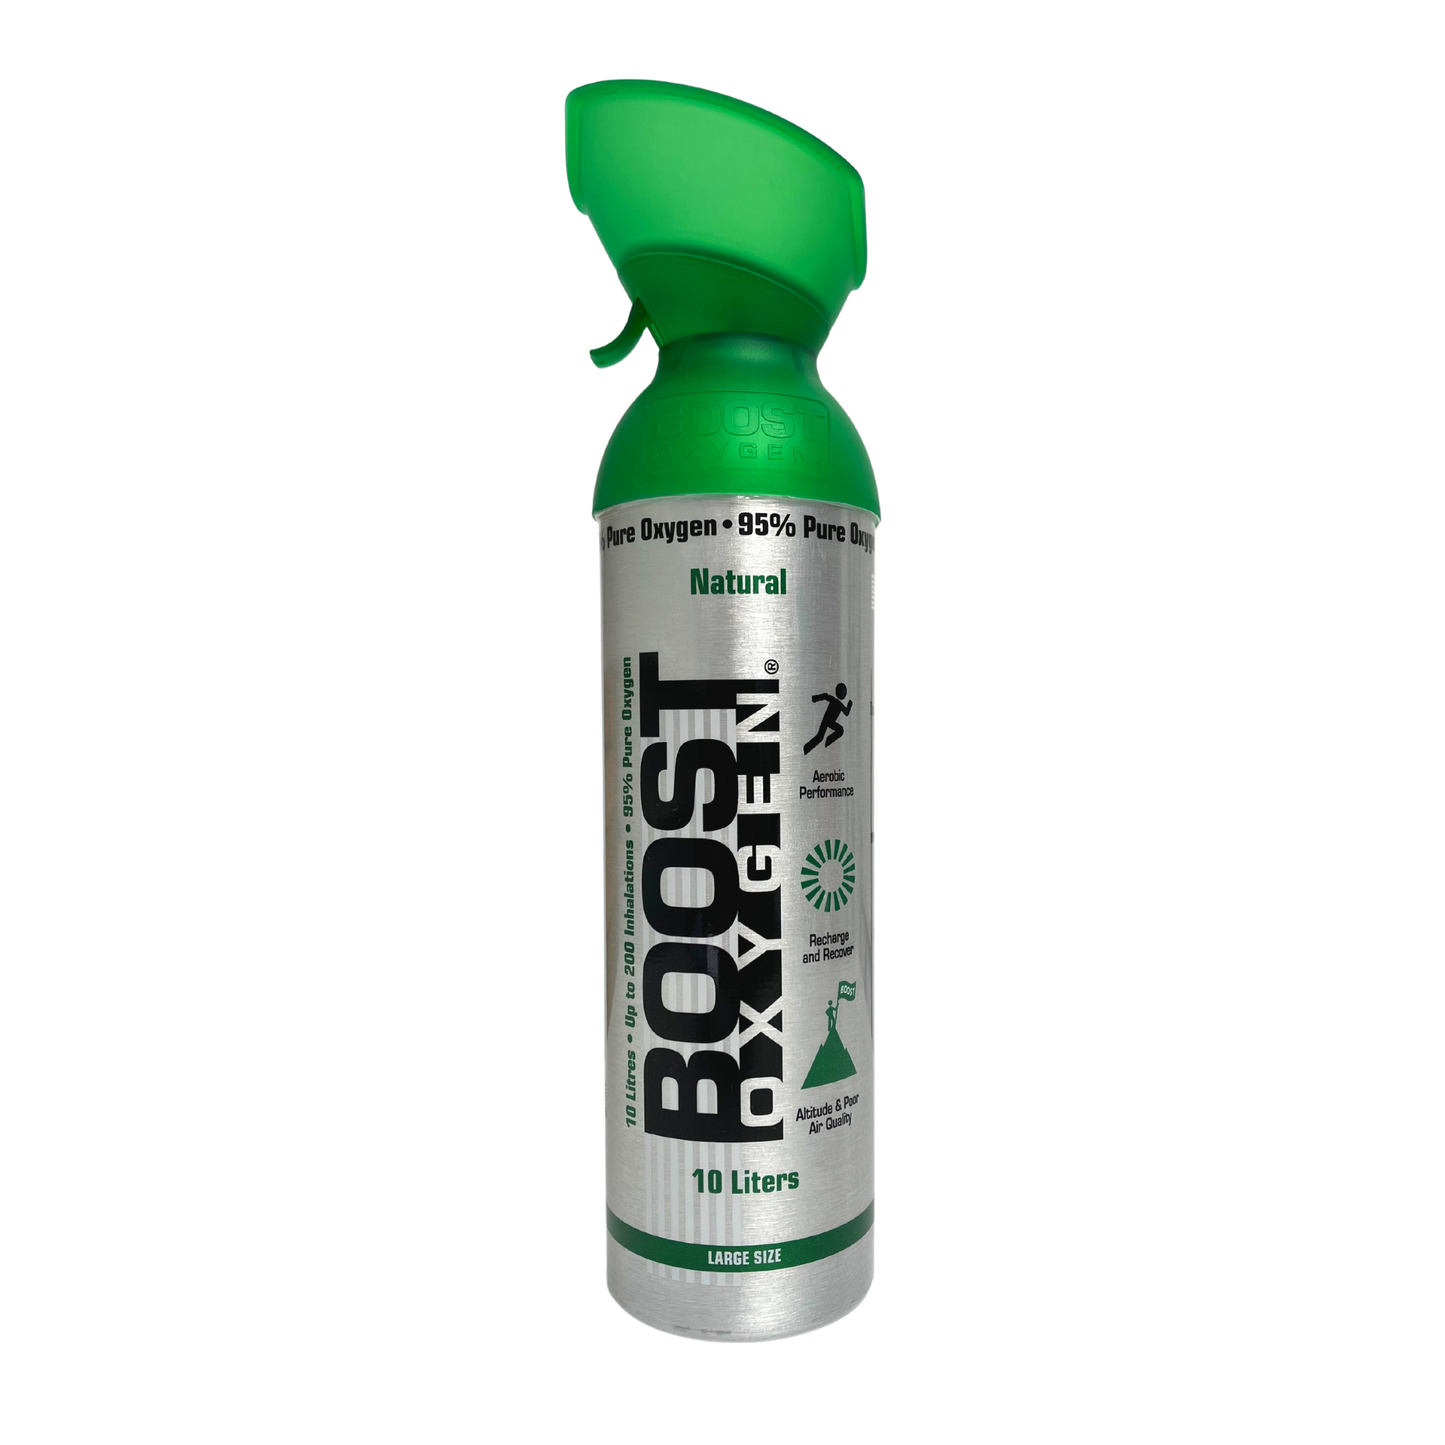 Boost Oxygen Natural 200 Breath (Large Size) - 2 Pack